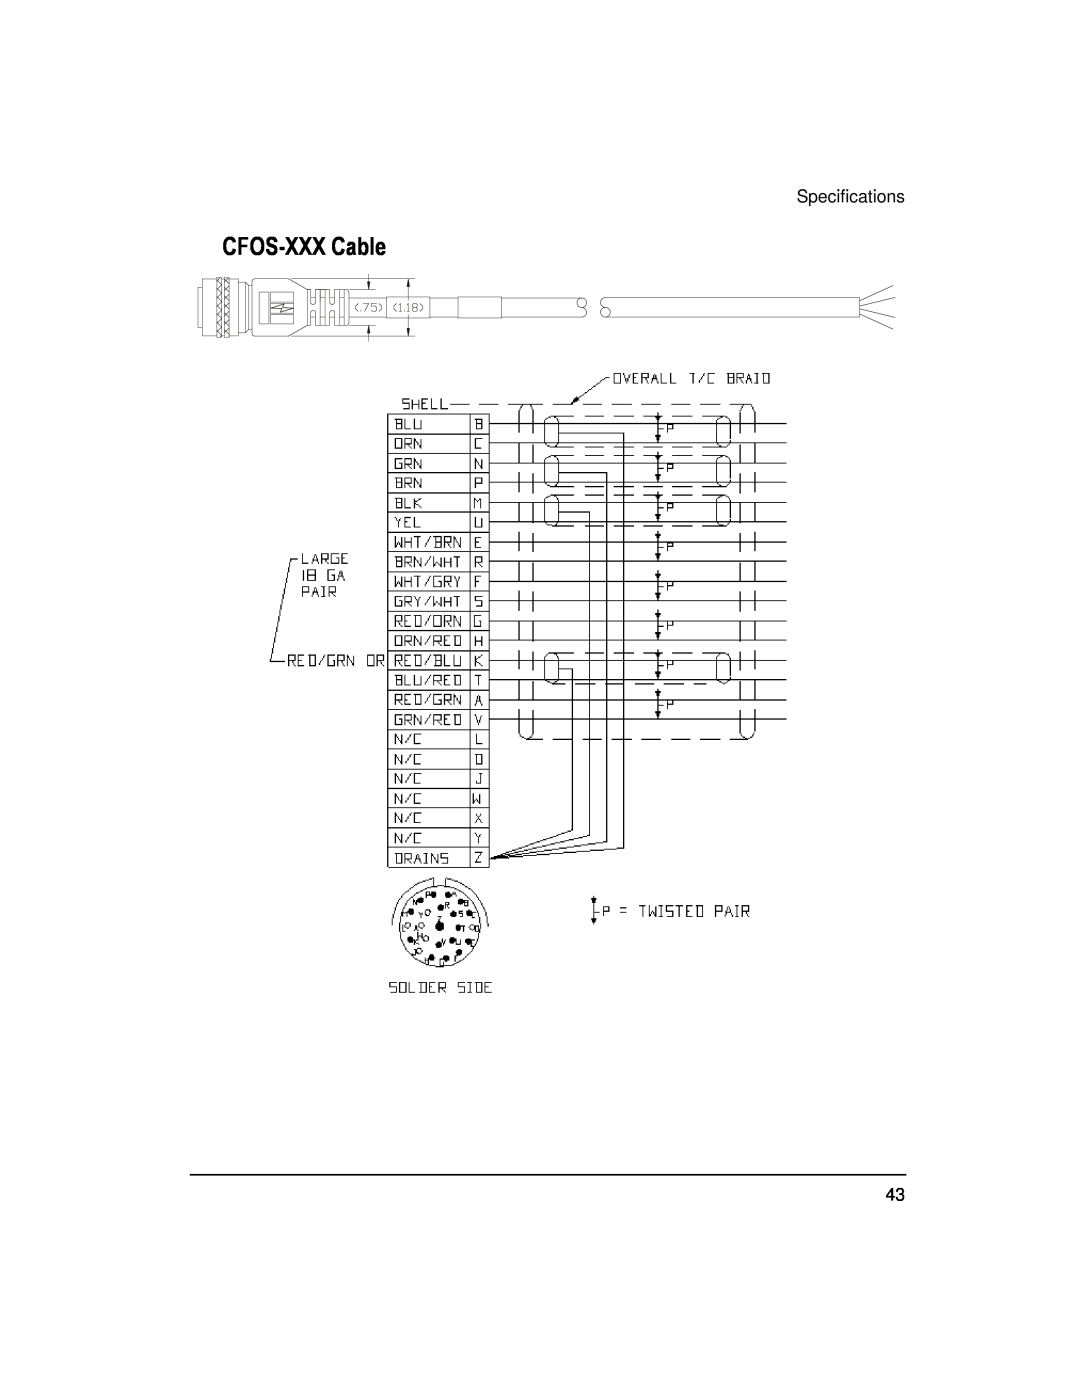 Emerson 400508-02 installation manual CFOS-XXX Cable, Specifications 